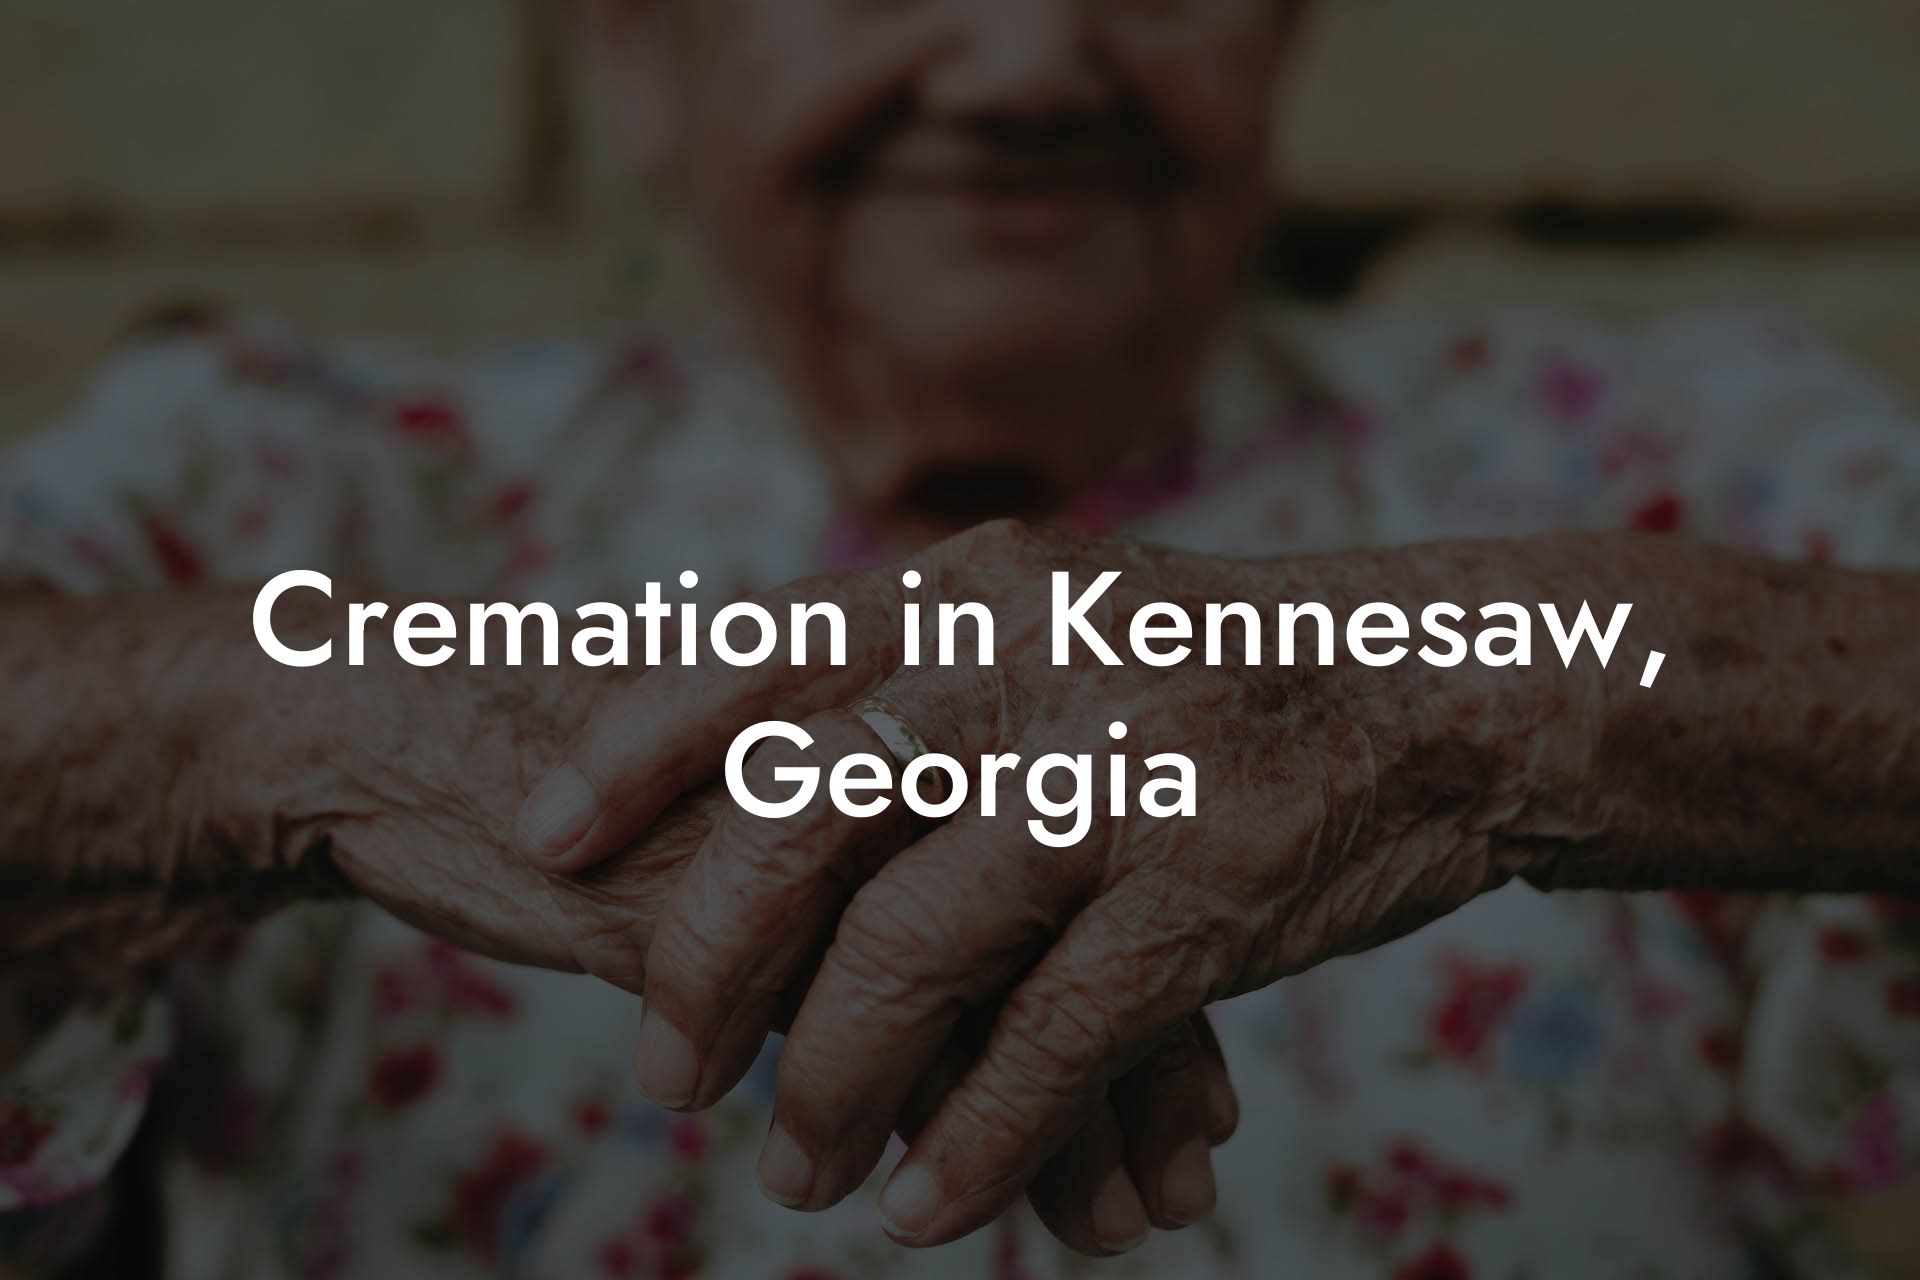 Cremation in Kennesaw, Georgia